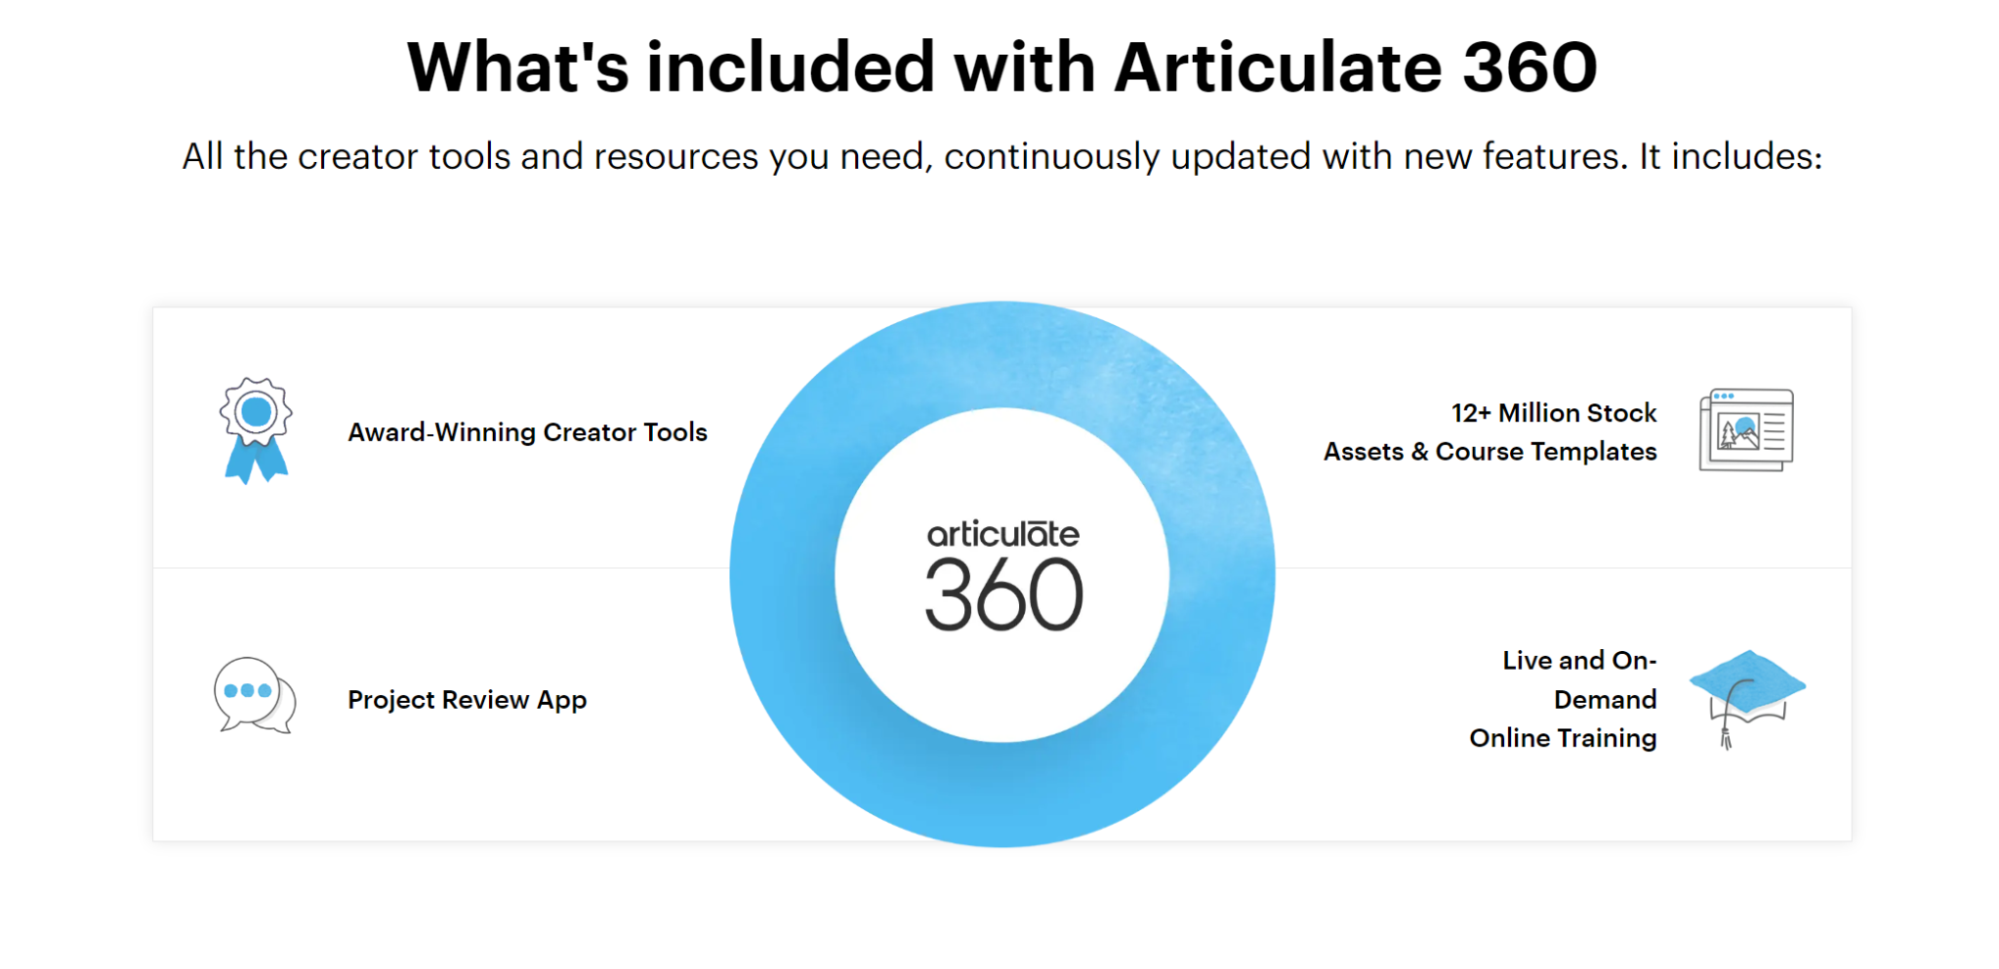 Articulate 360 is a comprehensive offering for companies looking to upskill their workforce